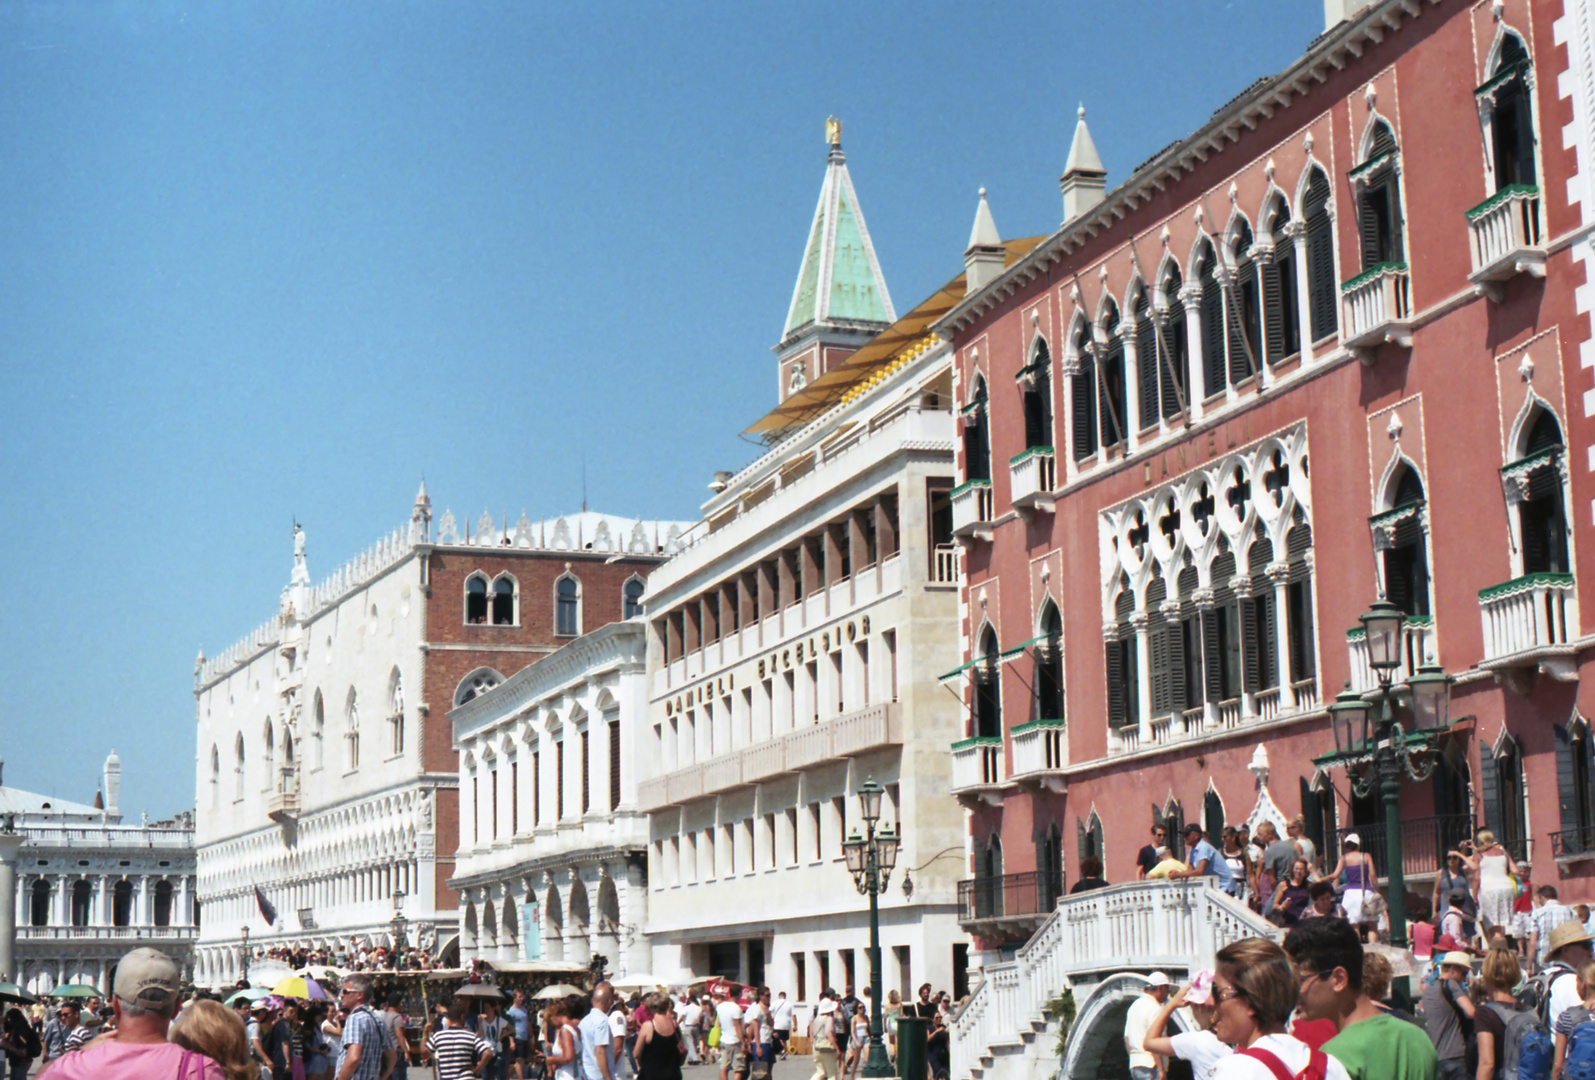 In the center of Venice.